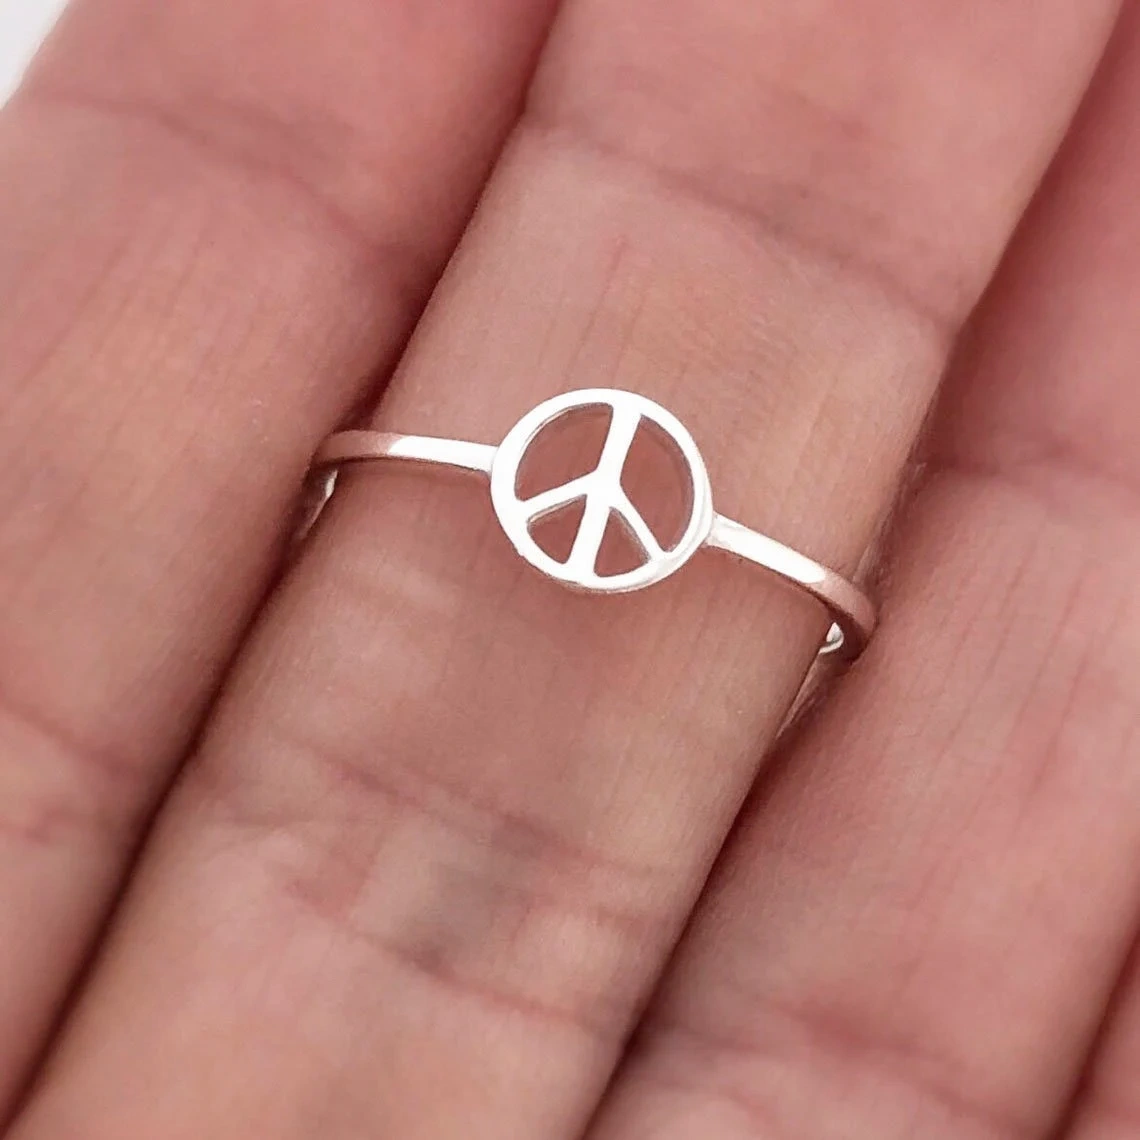 925 Sterling Silver Peace Ring Silver Unique Retro ring Geometric Stacking Solid Silver Hippie Modern Ring Minimalist Unisex peace ring-10 3/4 US/Uk size – V-1